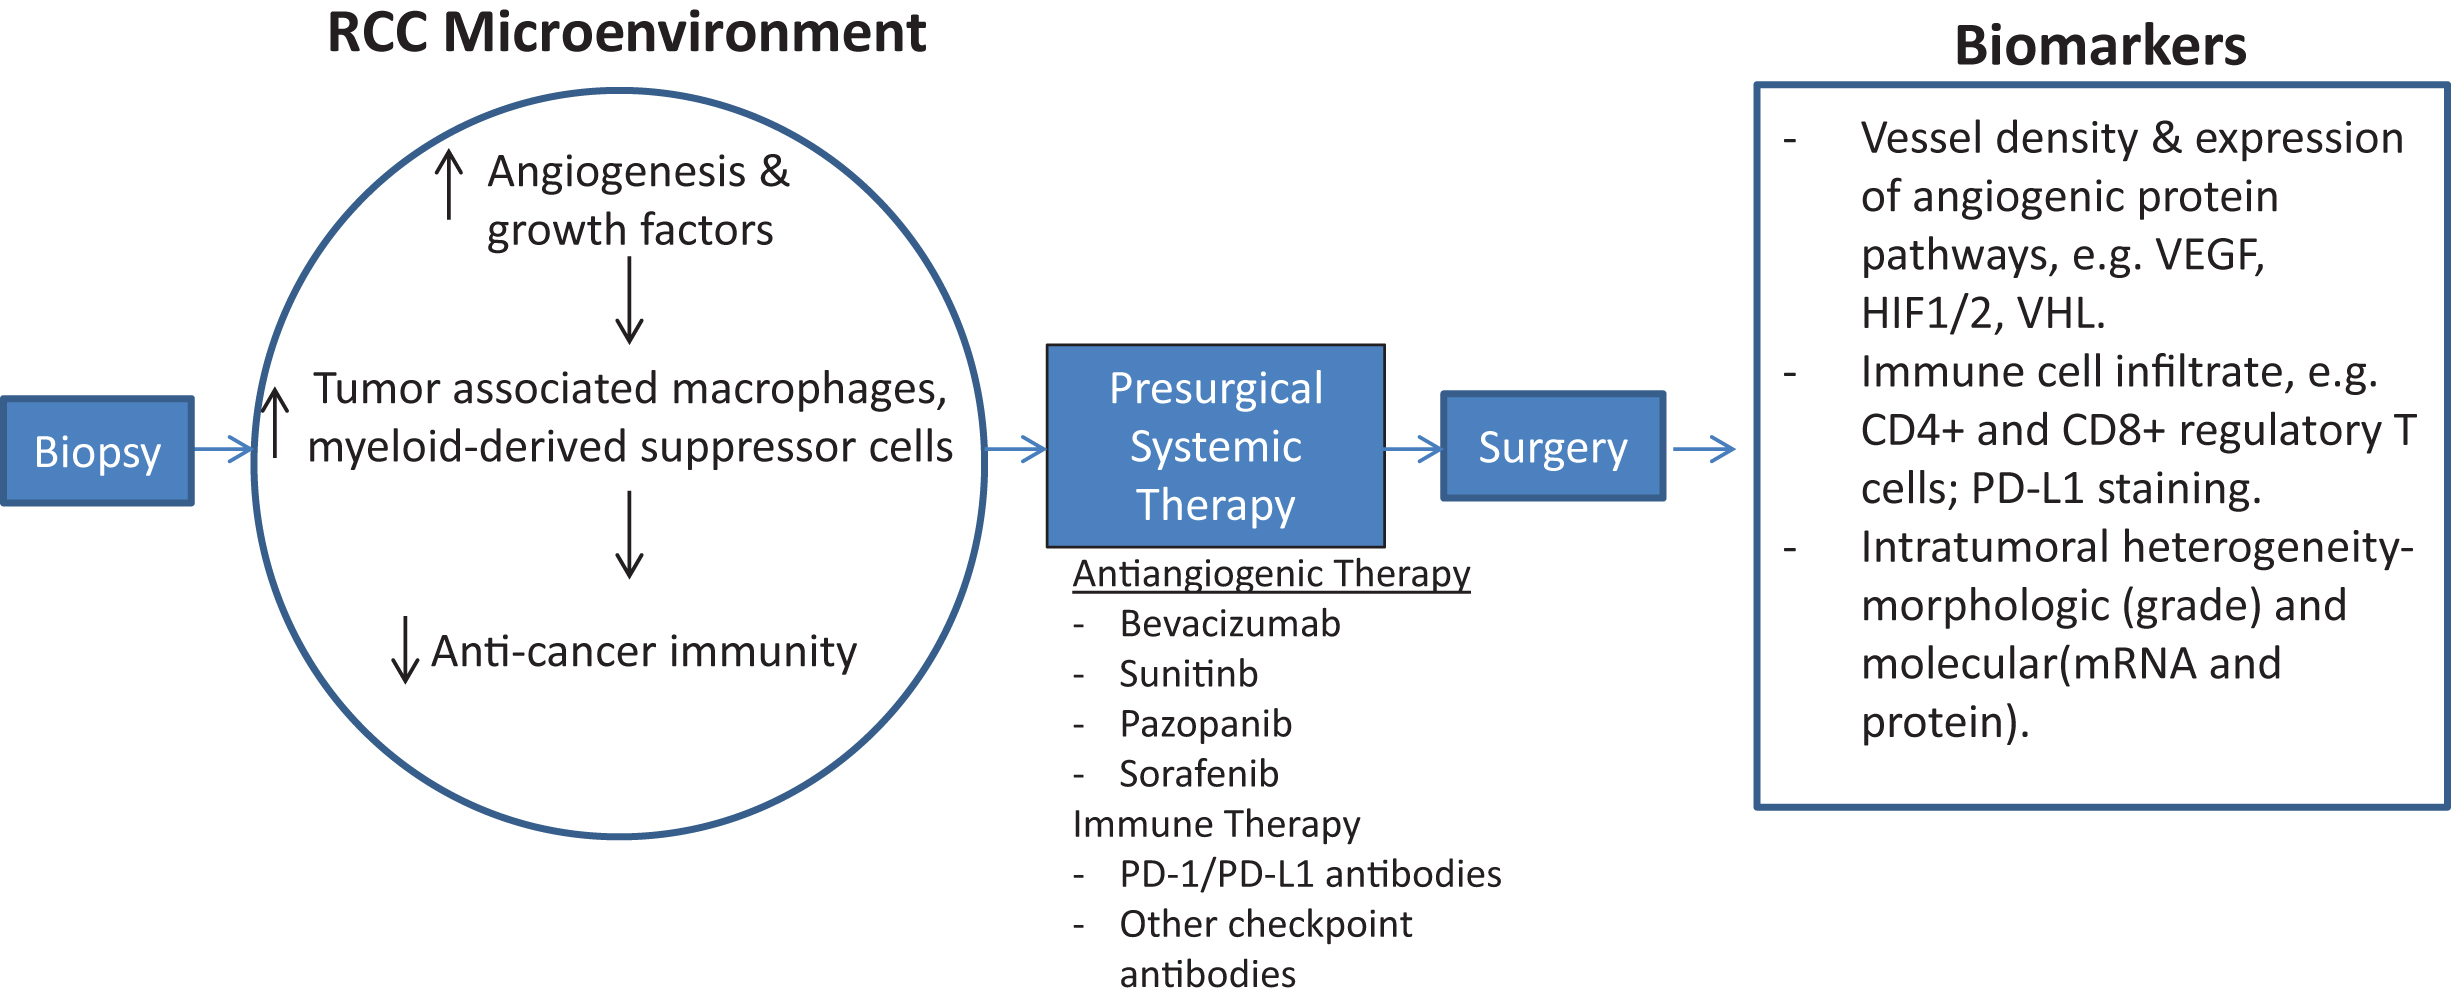 Schematic of early-phase clinical trial for presurgical systemic antiangiogenic therapy in metastatic RCC. Sequential tissue acquisition pre and post systemic therapy allows for identification of biologic drivers of cancer progression as well as predictive and prognostic biomarker development.